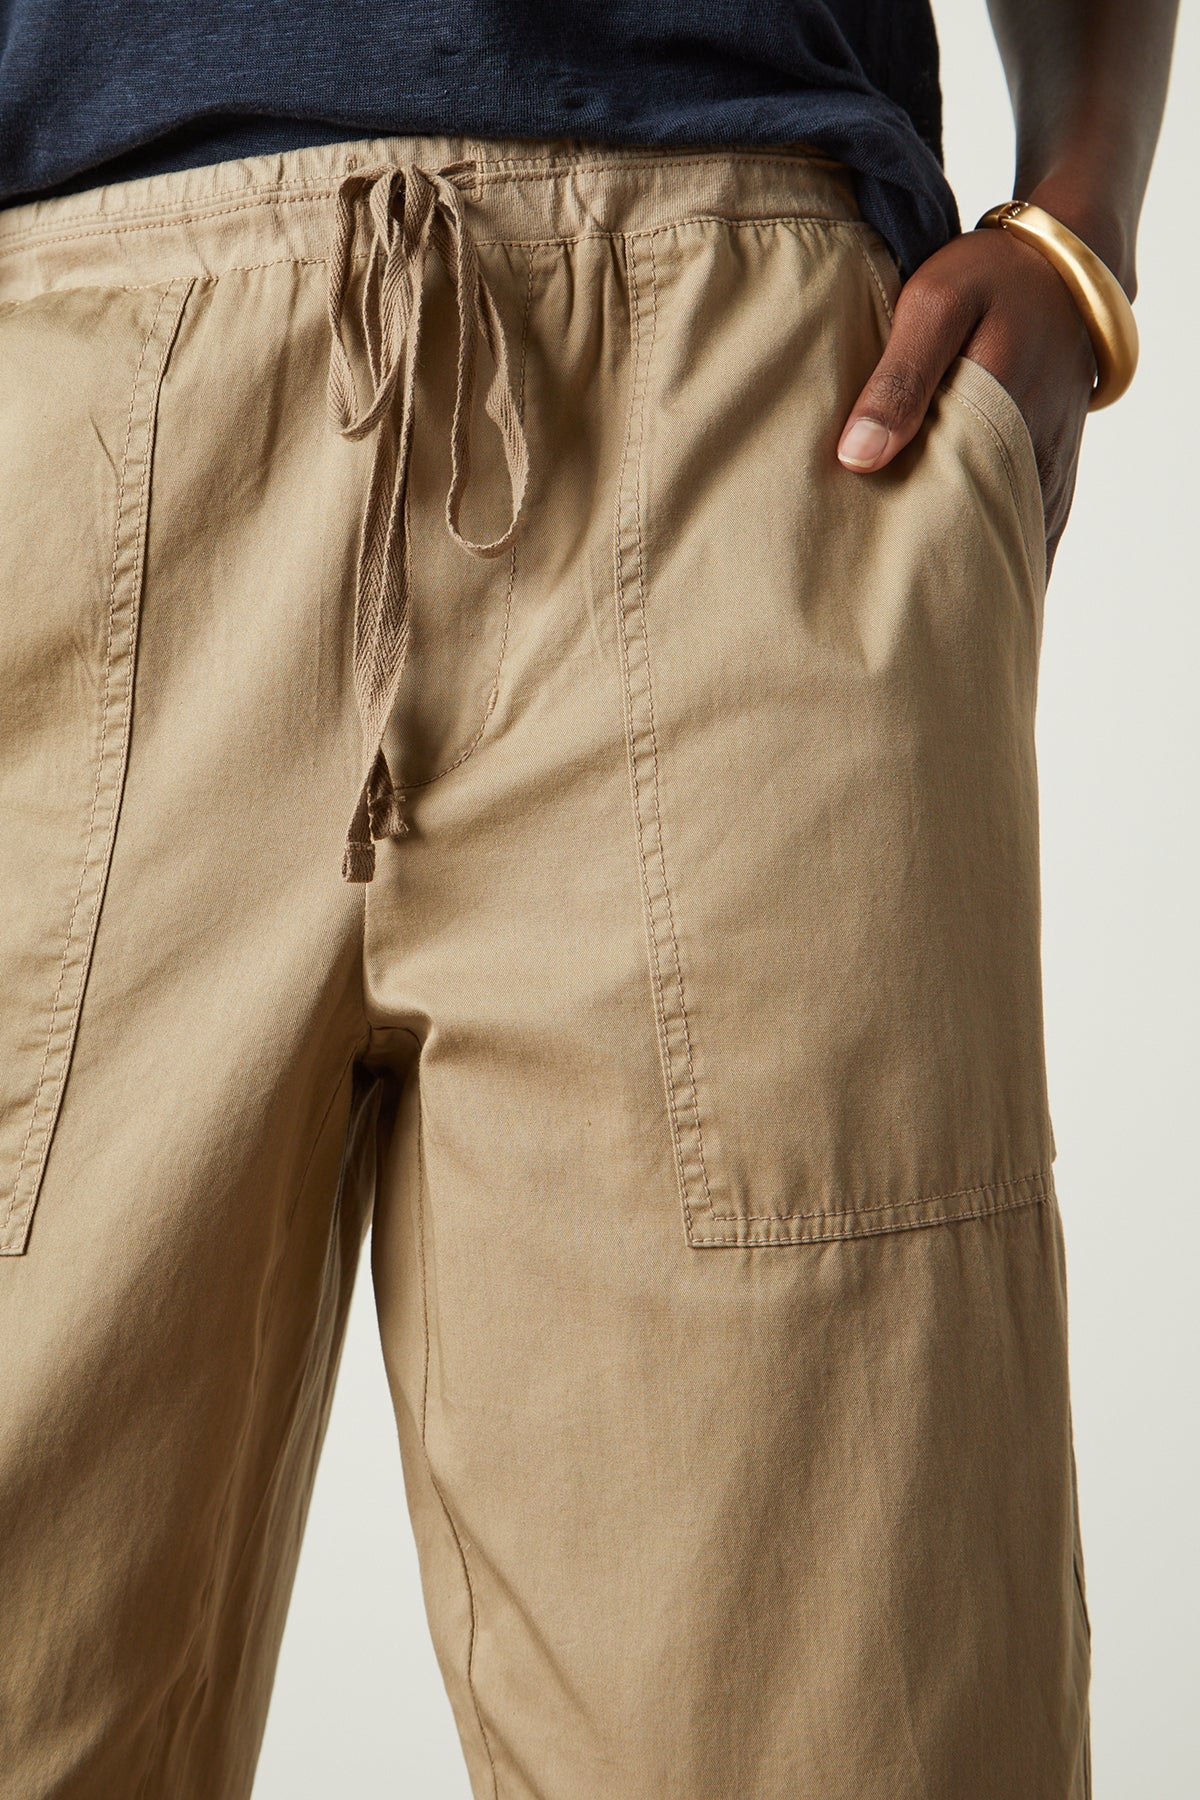 Misty Pant in oak twill front close up detail-26496414974145